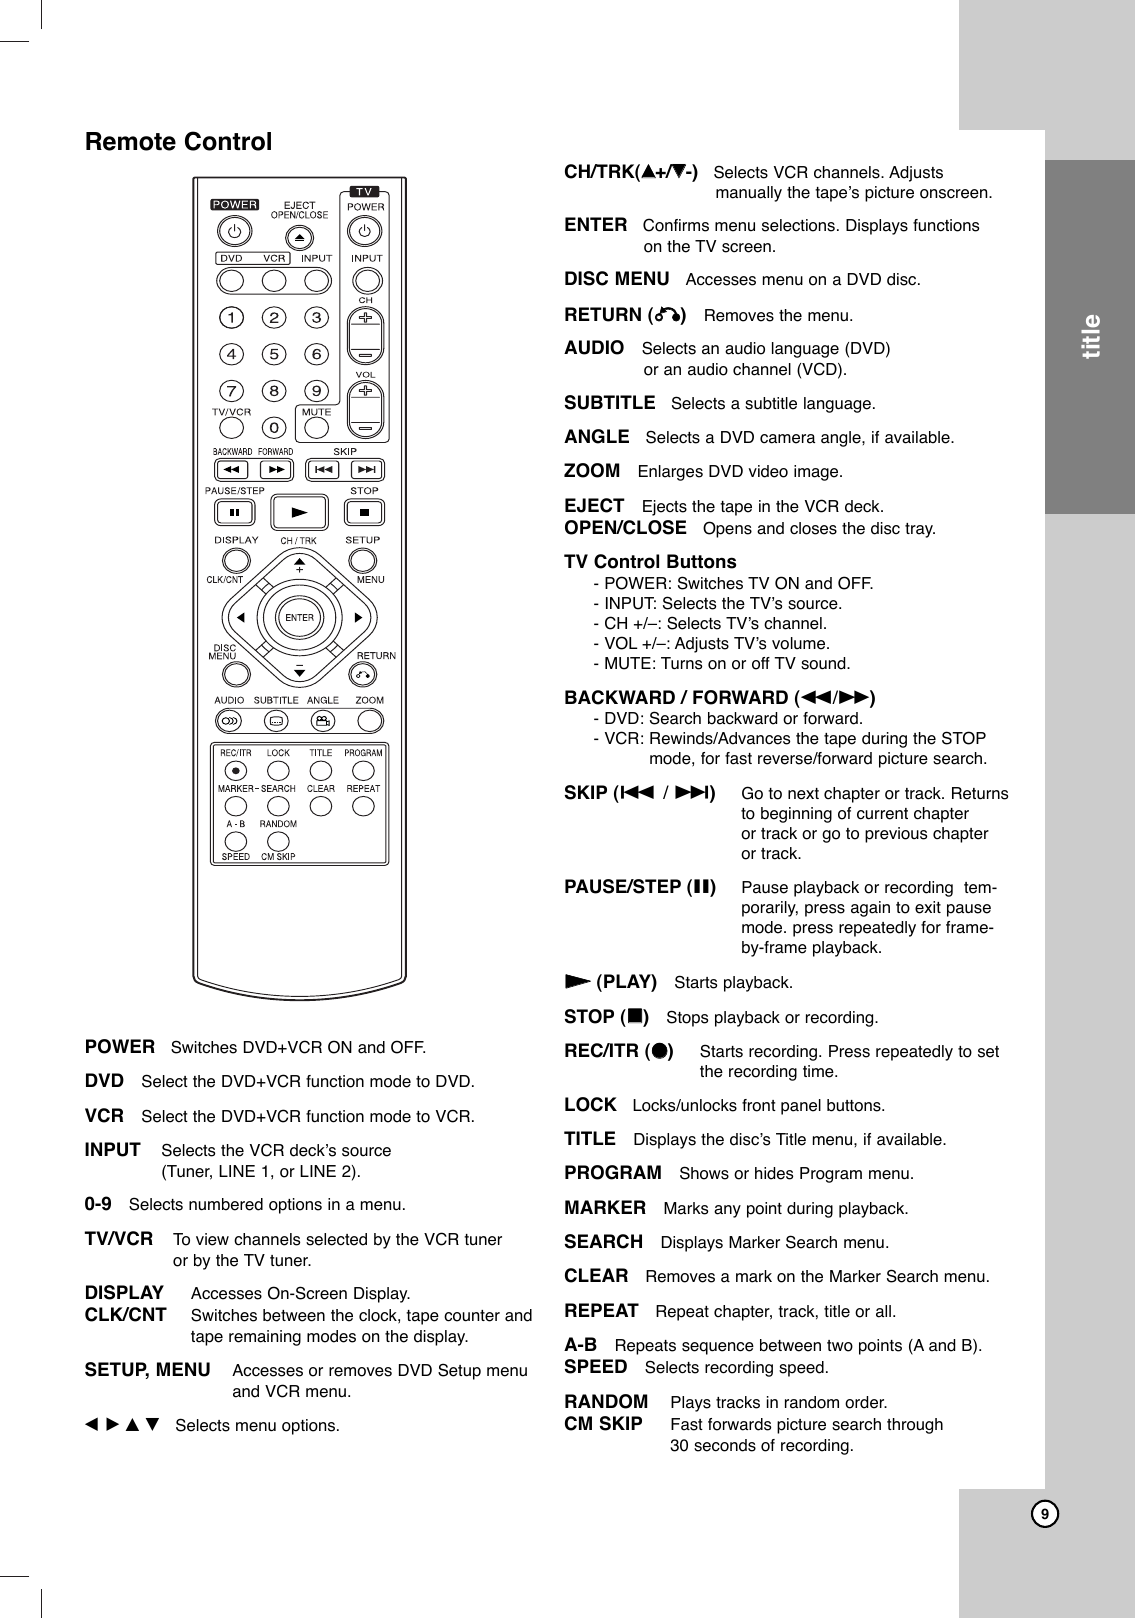 9POWER Switches DVD+VCR ON and OFF.DVD Select the DVD+VCR function mode to DVD. VCR Select the DVD+VCR function mode to VCR. INPUT Selects the VCR deck’s source(Tuner, LINE 1, or LINE 2).0-9   Selects numbered options in a menu.TV/VCR To  view channels selected by the VCR tuner or by the TV tuner.DISPLAY Accesses On-Screen Display.CLK/CNT Switches between the clock, tape counter and tape remaining modes on the display.SETUP, MENU Accesses or removes DVD Setup menu and VCR menu. bBvV Selects menu options.CH/TRK(vv+/VV-) Selects VCR channels. Adjusts manually the tape’s picture onscreen.ENTER Confirms menu selections. Displays functions on the TV screen.DISC MENU   Accesses menu on a DVD disc. RETURN (OO)   Removes the menu.AUDIO   Selects an audio language (DVD) or an audio channel (VCD). SUBTITLE Selects a subtitle language.ANGLE  Selects a DVD camera angle, if available.ZOOM   Enlarges DVD video image.EJECT   Ejects the tape in the VCR deck.OPEN/CLOSE  Opens and closes the disc tray.TV Control Buttons- POWER: Switches TV ON and OFF.- INPUT: Selects the TV’s source.- CH +/–: Selects TV’s channel.- VOL +/–: Adjusts TV’s volume.- MUTE: Turns on or off TV sound.BACKWARD / FORWARD (m/M)- DVD: Search backward or forward.- VCR: Rewinds/Advances the tape during the STOPmode, for fast reverse/forward picture search.SKIP (./ &gt;)Go to next chapter or track. Returns to beginning of current chapter or track or go to previous chapter or track.PAUSE/STEP (X)Pause playback or recording  tem-porarily, press again to exit pausemode. press repeatedly for frame-by-frame playback.NN(PLAY)   Starts playback.STOP (xx)   Stops playback or recording.REC/ITR (zz)Starts recording. Press repeatedly to setthe recording time.LOCK Locks/unlocks front panel buttons.TITLE   Displays the disc’s Title menu, if available.PROGRAM   Shows or hides Program menu.MARKER   Marks any point during playback.SEARCH   Displays Marker Search menu.CLEAR   Removes a mark on the Marker Search menu.REPEAT   Repeat chapter, track, title or all.A-B   Repeats sequence between two points (A and B). SPEED   Selects recording speed.RANDOM Plays tracks in random order.CM SKIP Fast forwards picture search through 30 seconds of recording.titleRemote Control